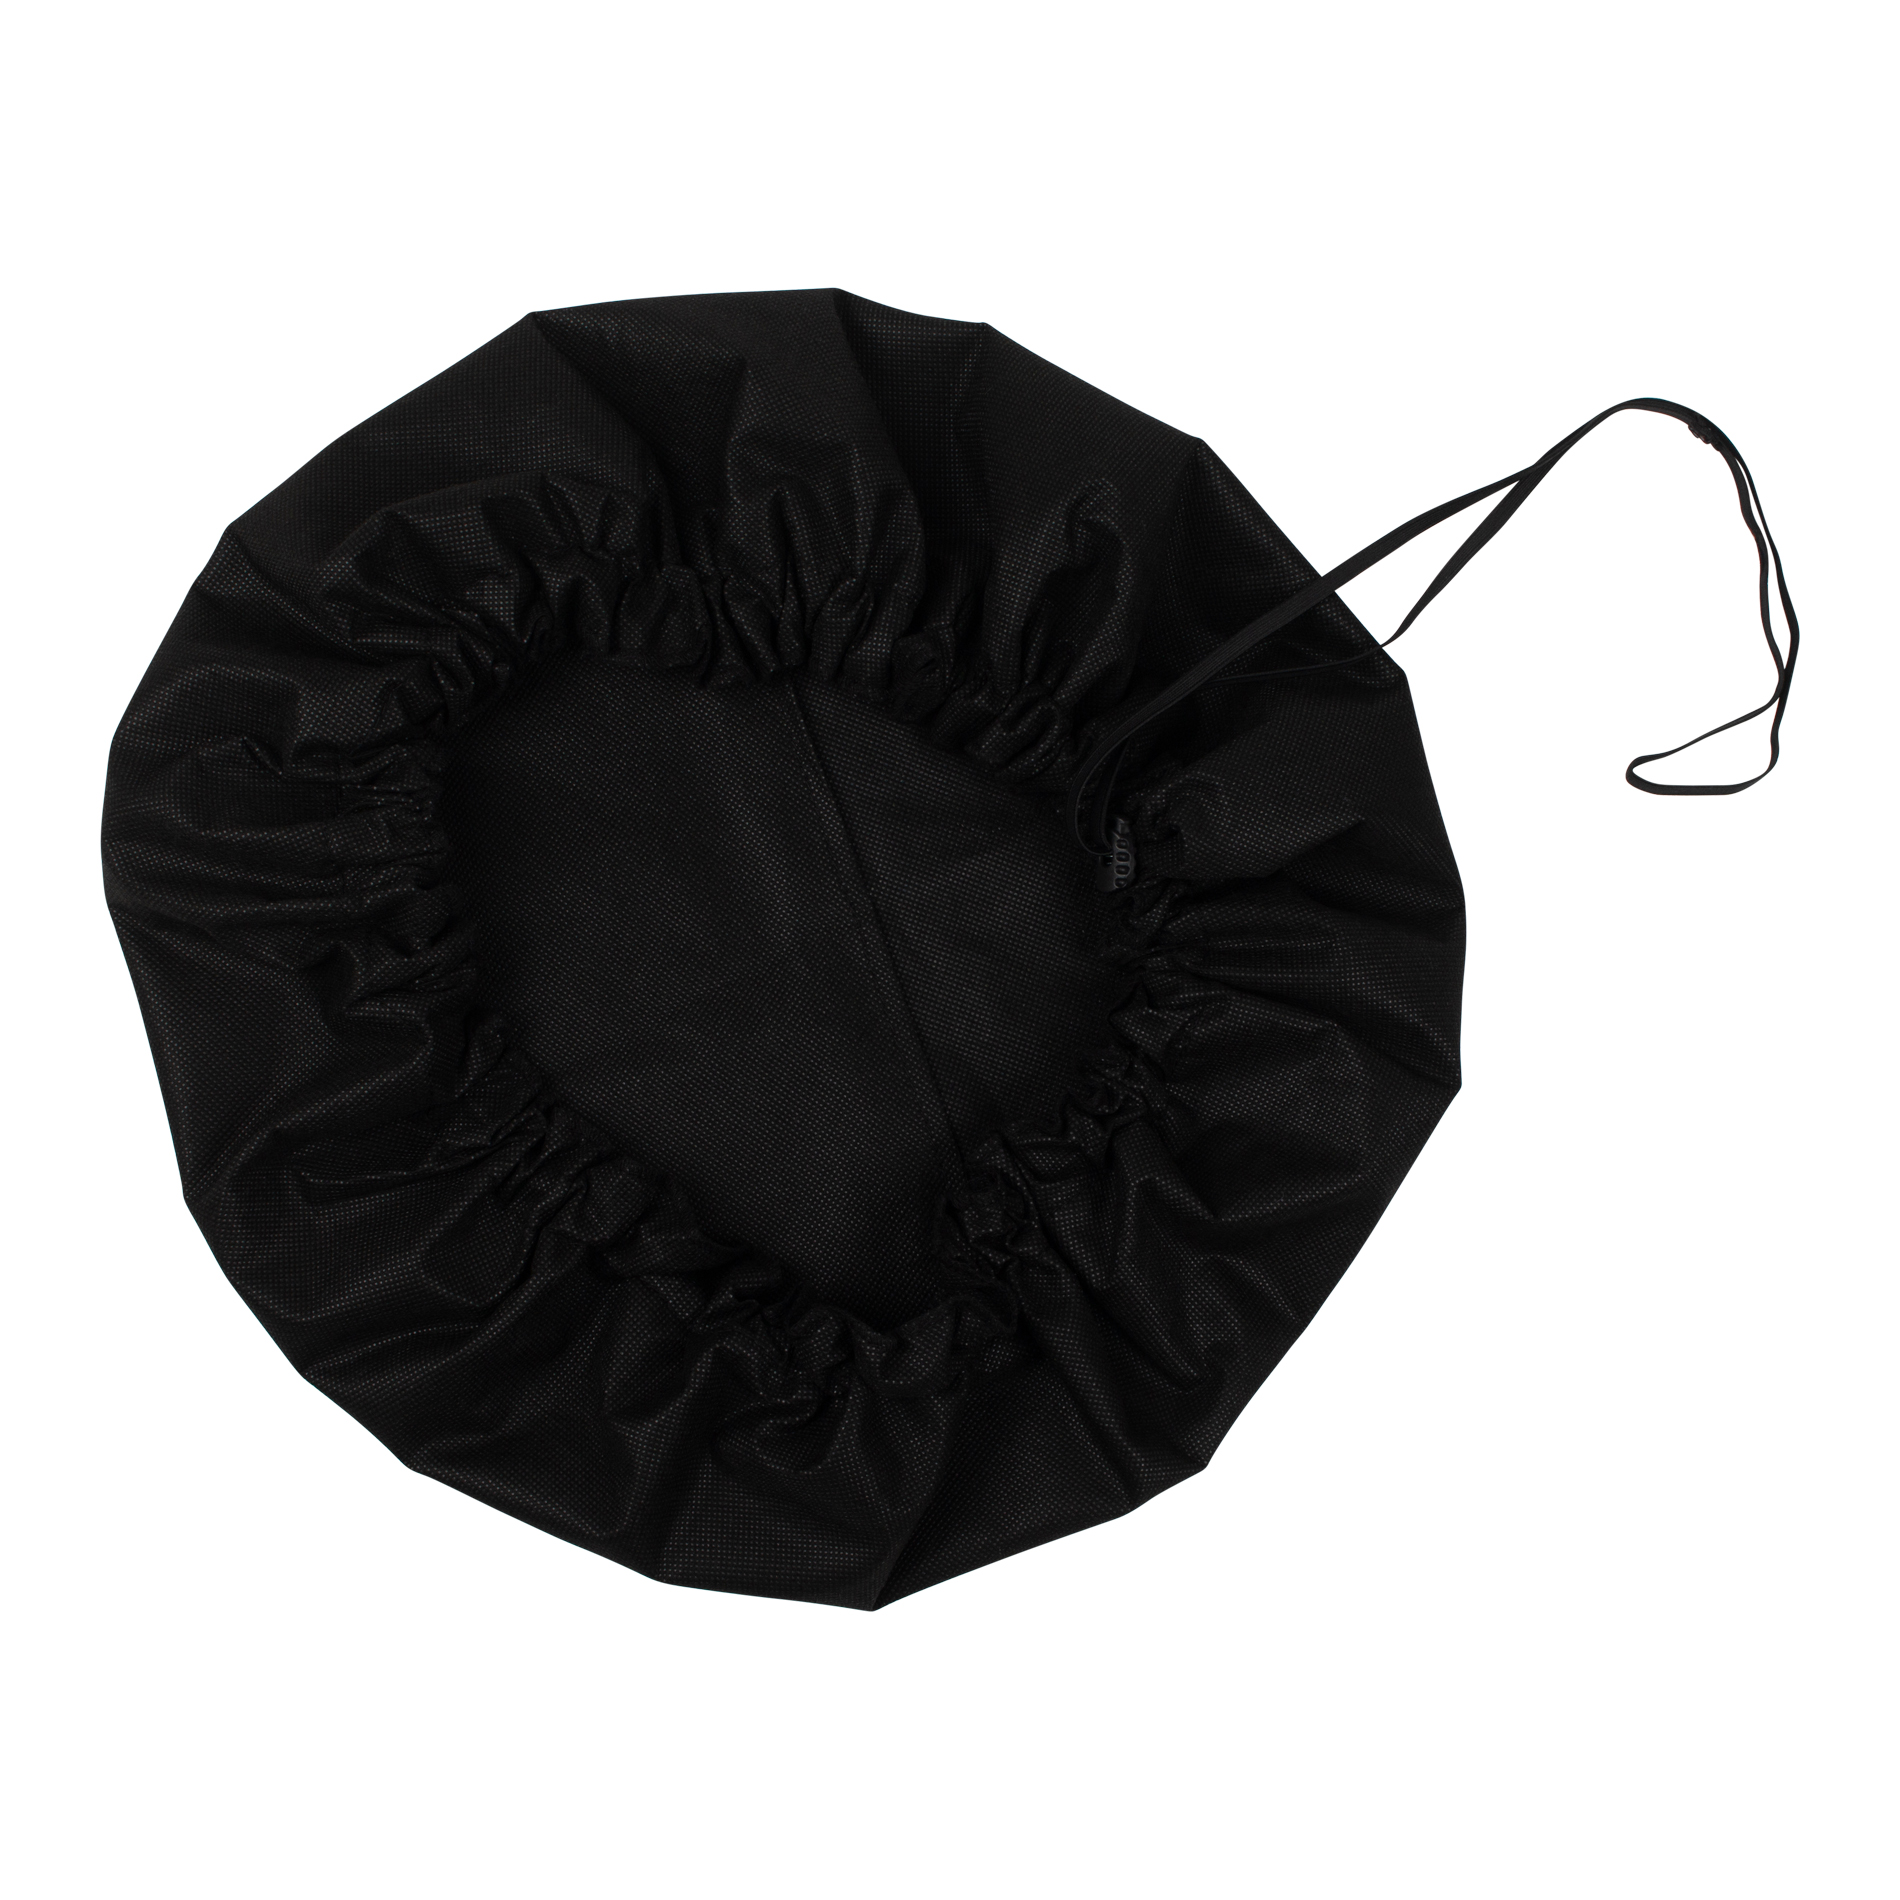 Black Bell Cover with MERV 13 filter, 18-19 Inches-GBELLCVR1819BK